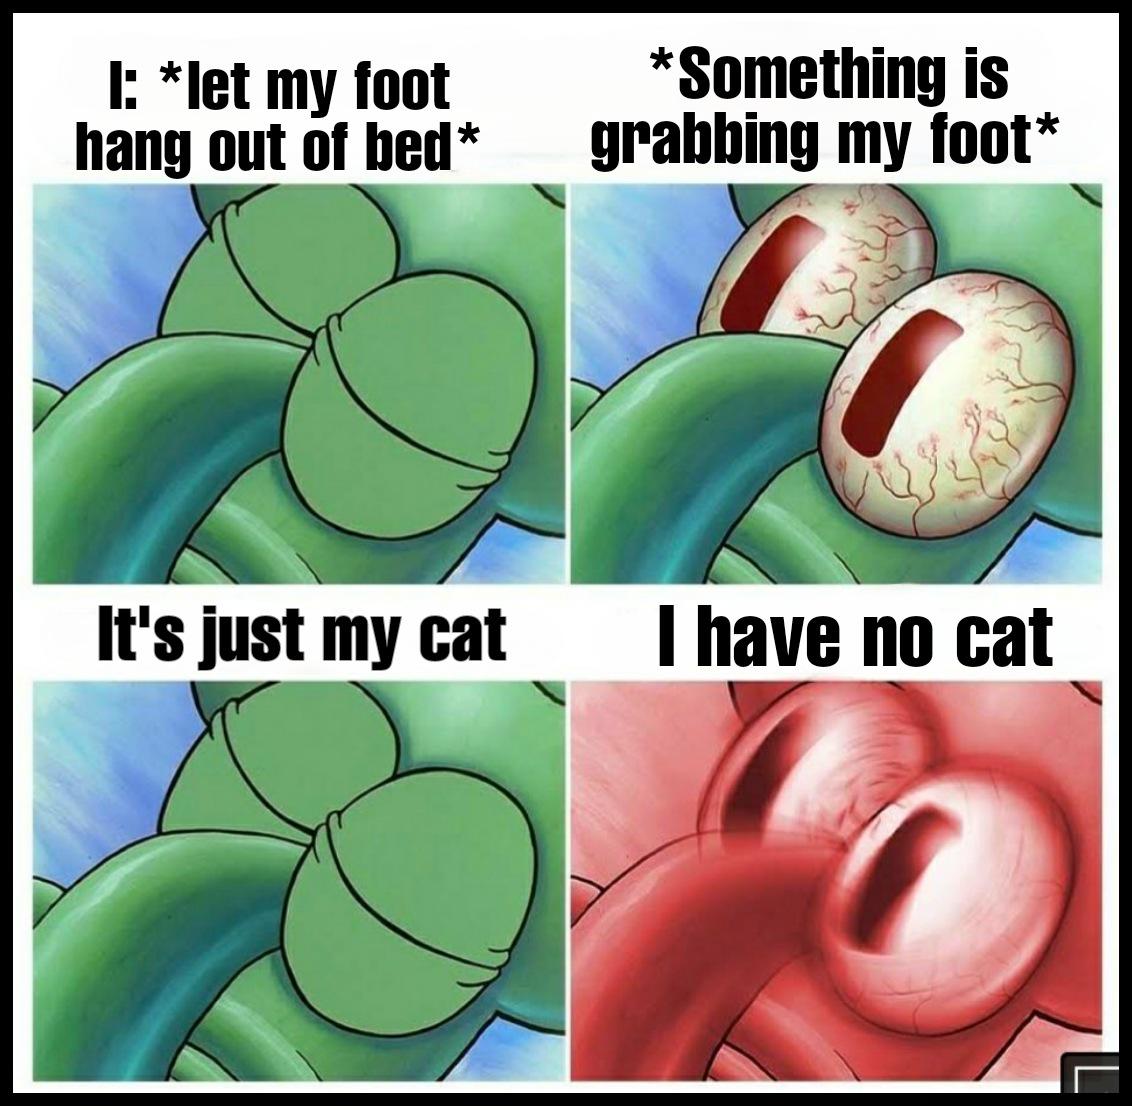 cartoon - 1 let my foot hang out of bed Something is grabbing my foot O It's just my cat I have no cat